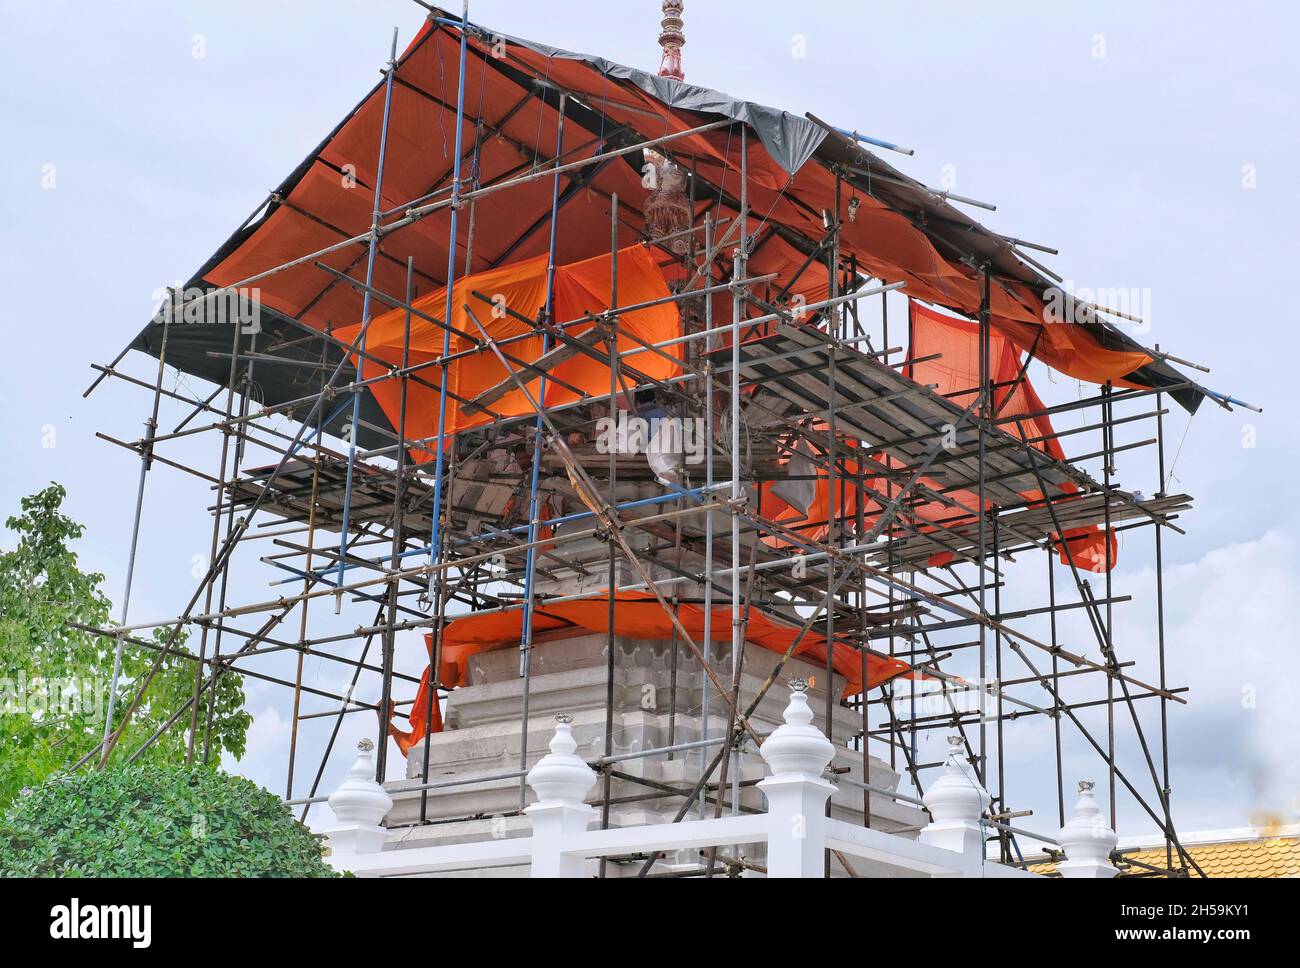 Bangkok / Thailand - 2021/11/01: A large white pagoda at Wat Pariwat temple under construction with scaffolding and temporary roofing. Stock Photo